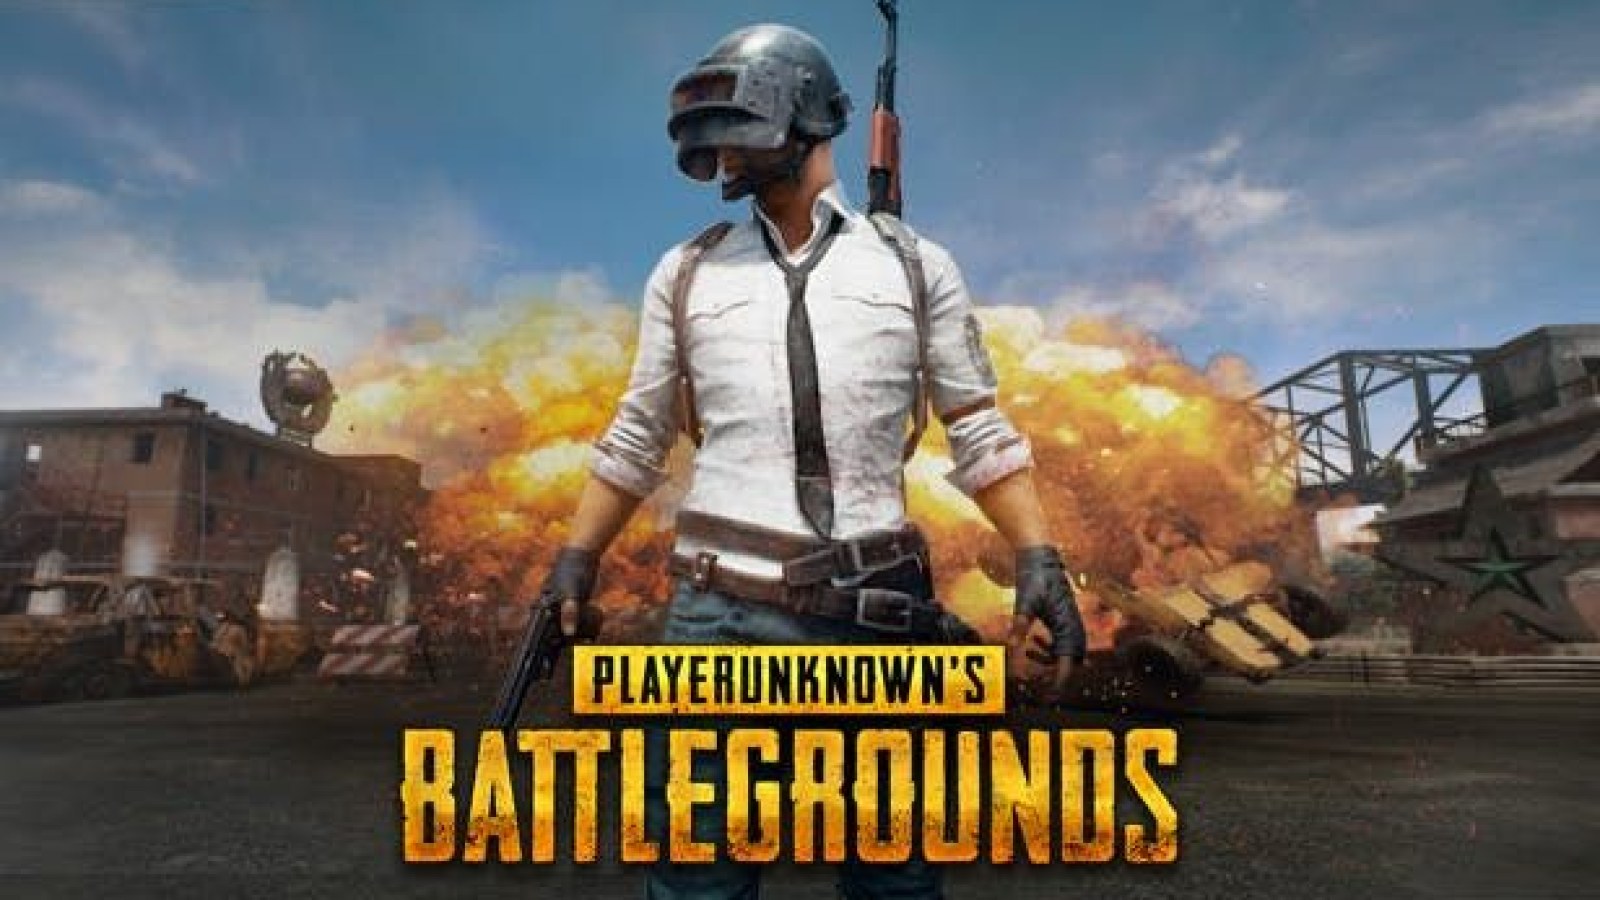 Beta pubg download android фото 79